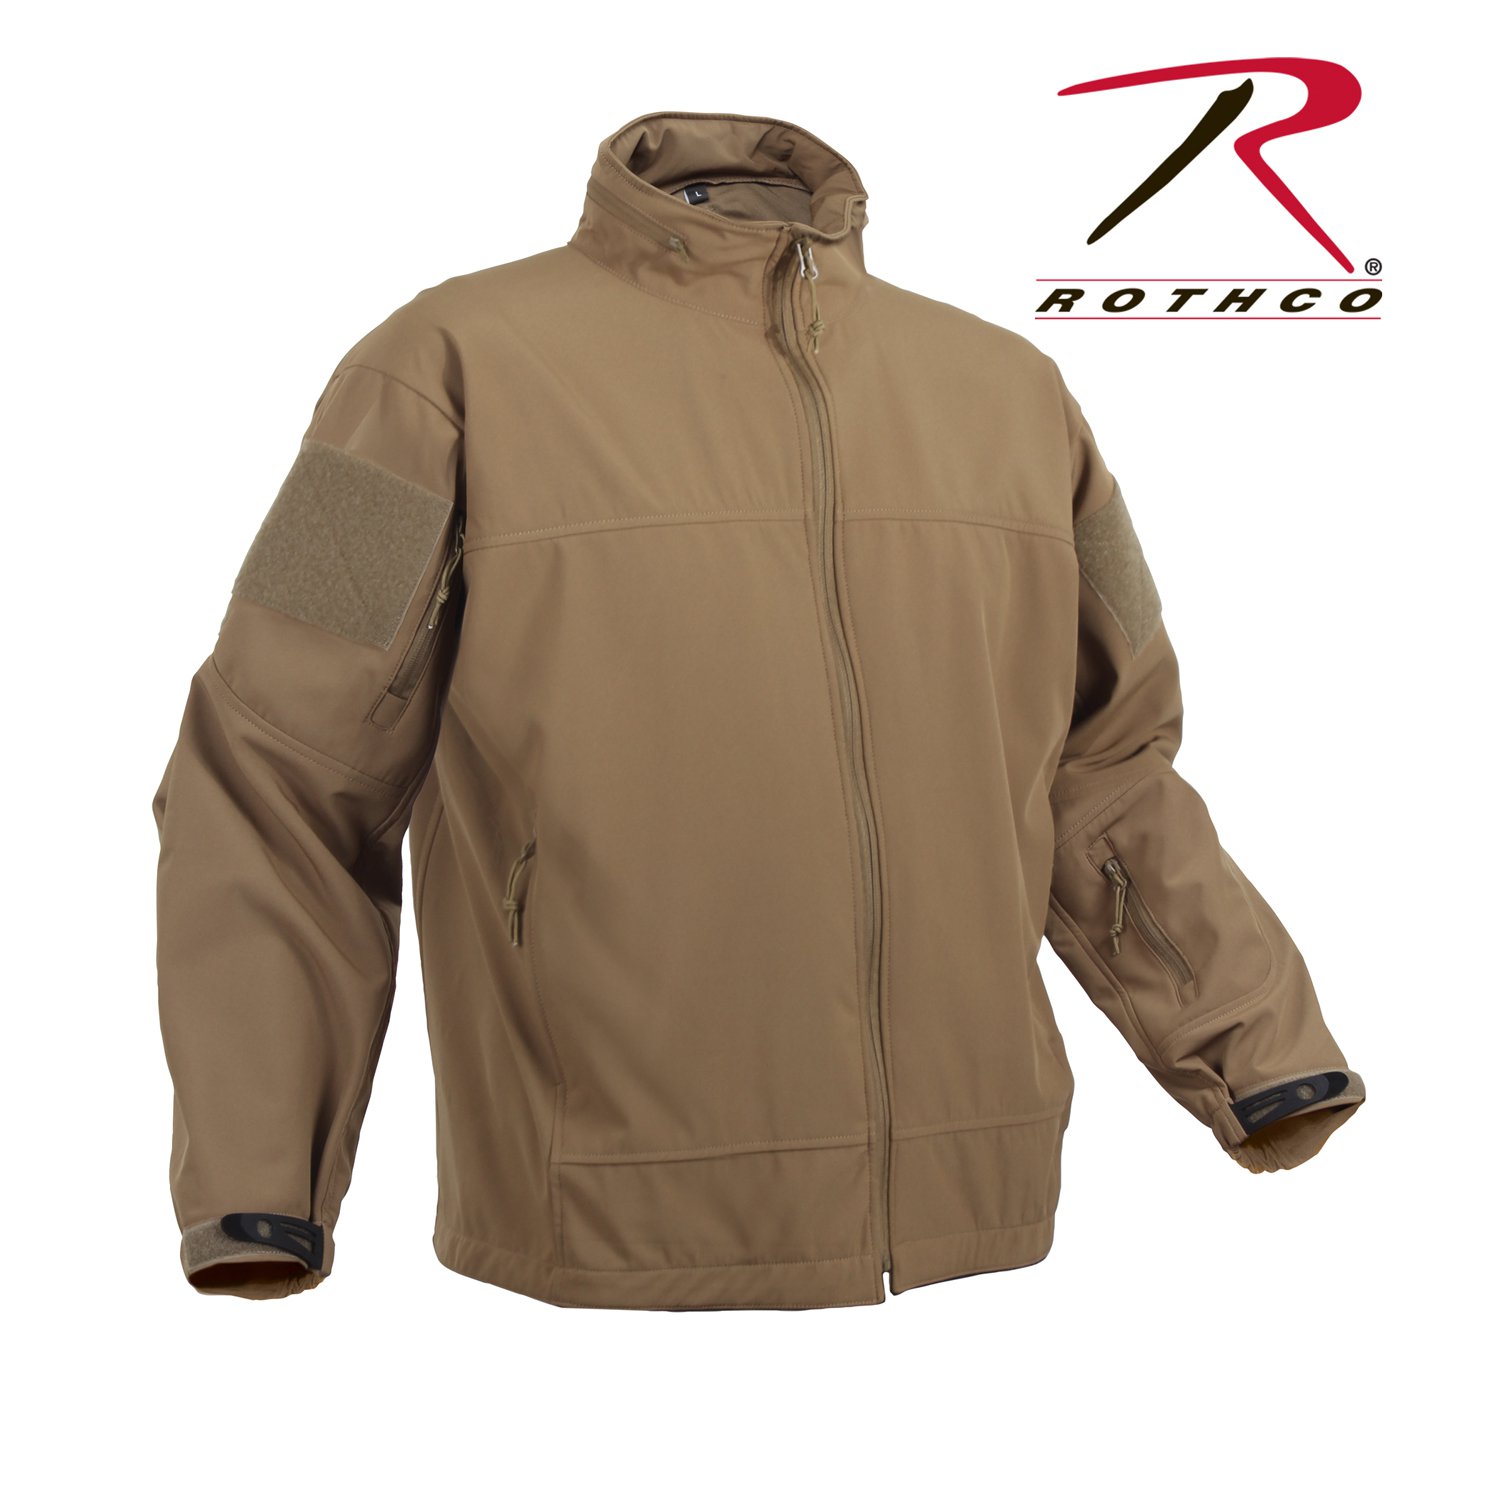 SZ Large Rothco Covert Ops Light Weight Soft Shell Jacket 5862